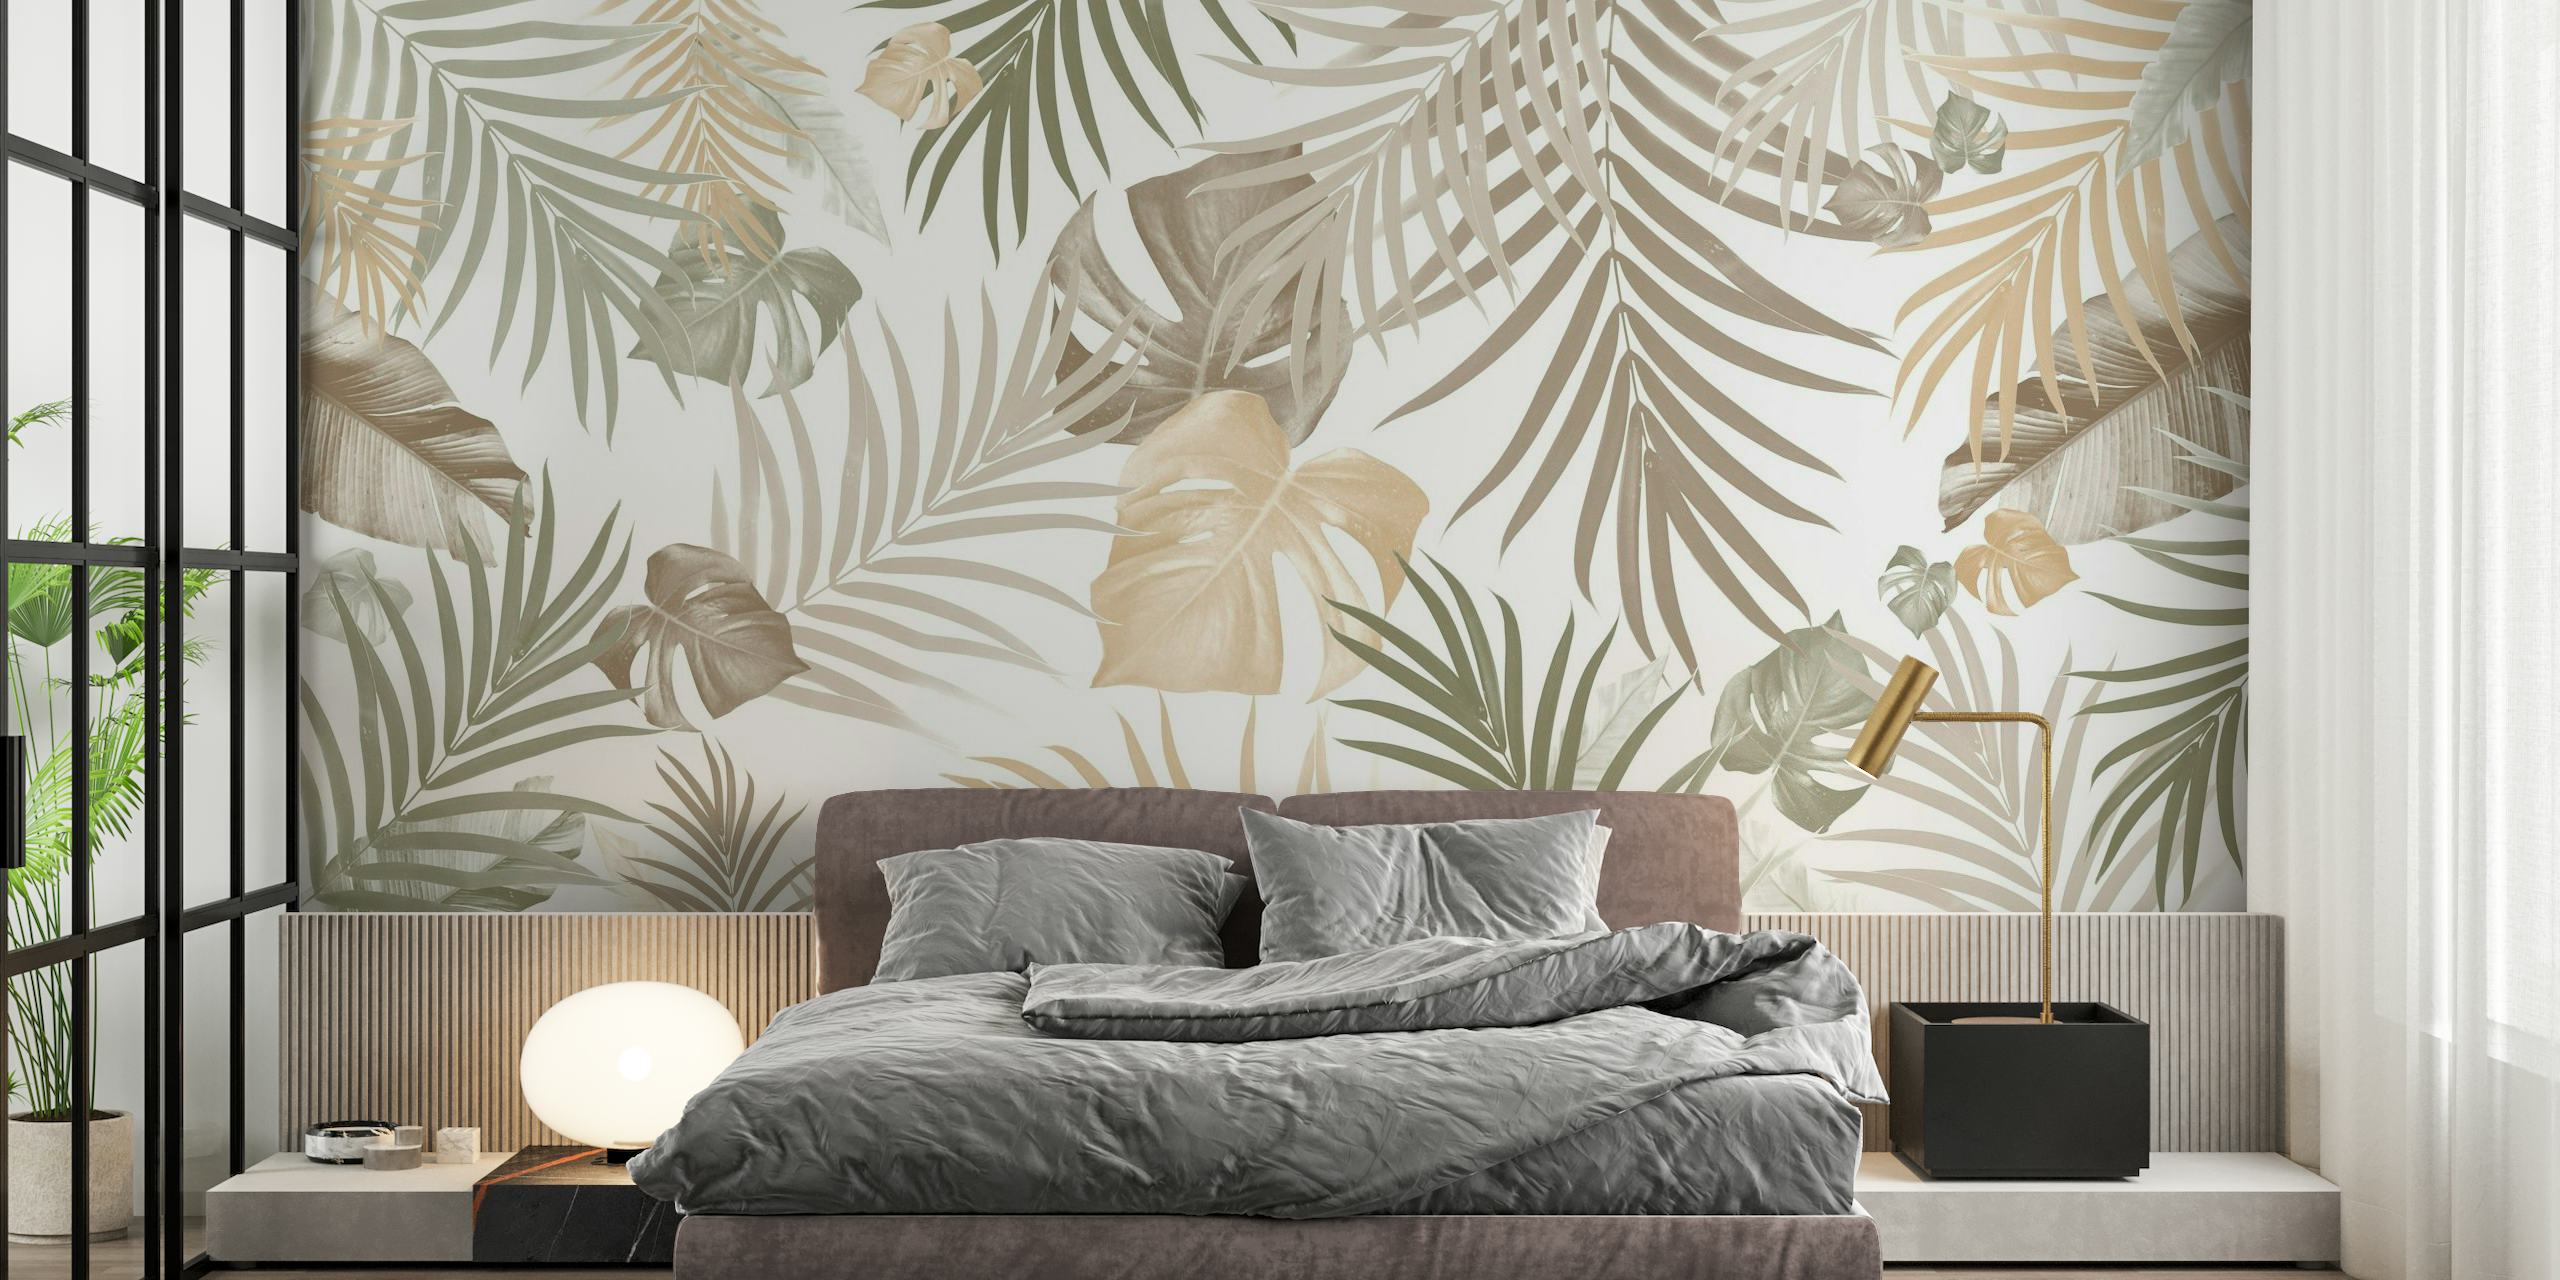 Elegant tropical jungle leaves wall mural in a neutral color palette